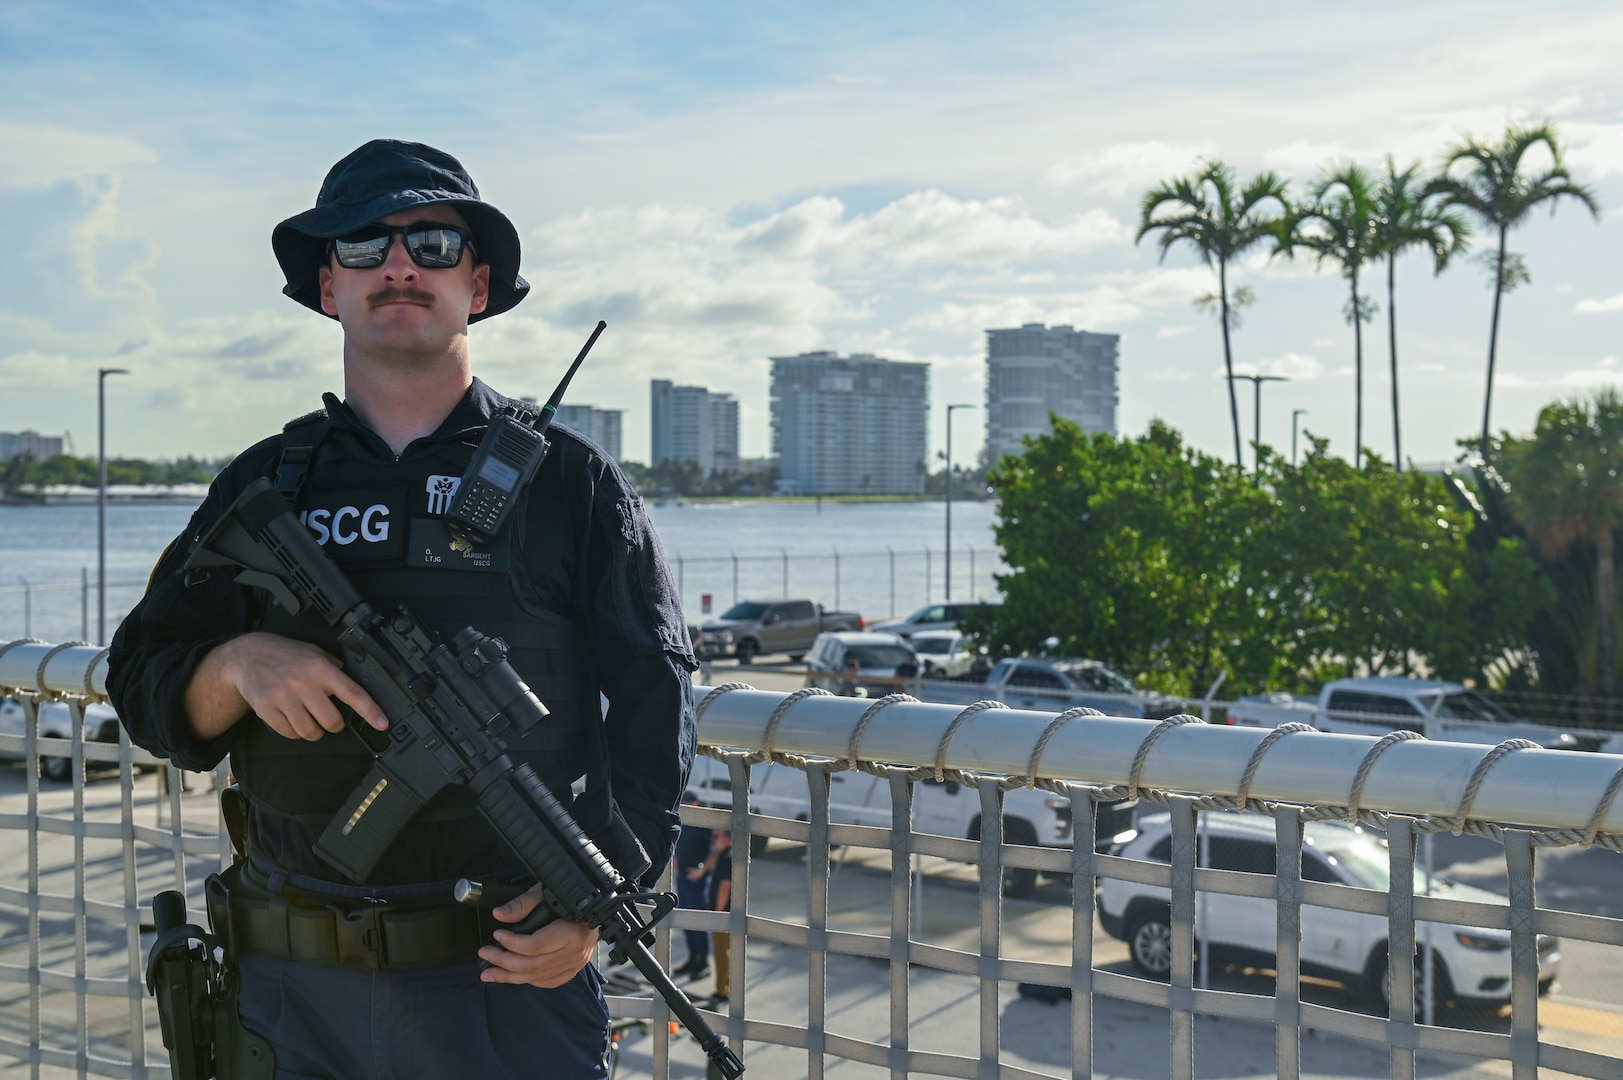 A crew member of the Coast Guard Cutter Forward standing watch over illegal narcotics, Port Everglades, Florida, July 22, 2024. Armed Coast Guardsmen stand watch over interdicted drugs to ensure security and accountability of seized contraband. (U.S. Coast Guard photo by Petty Officer 3rd Class Nicholas Strasburg)